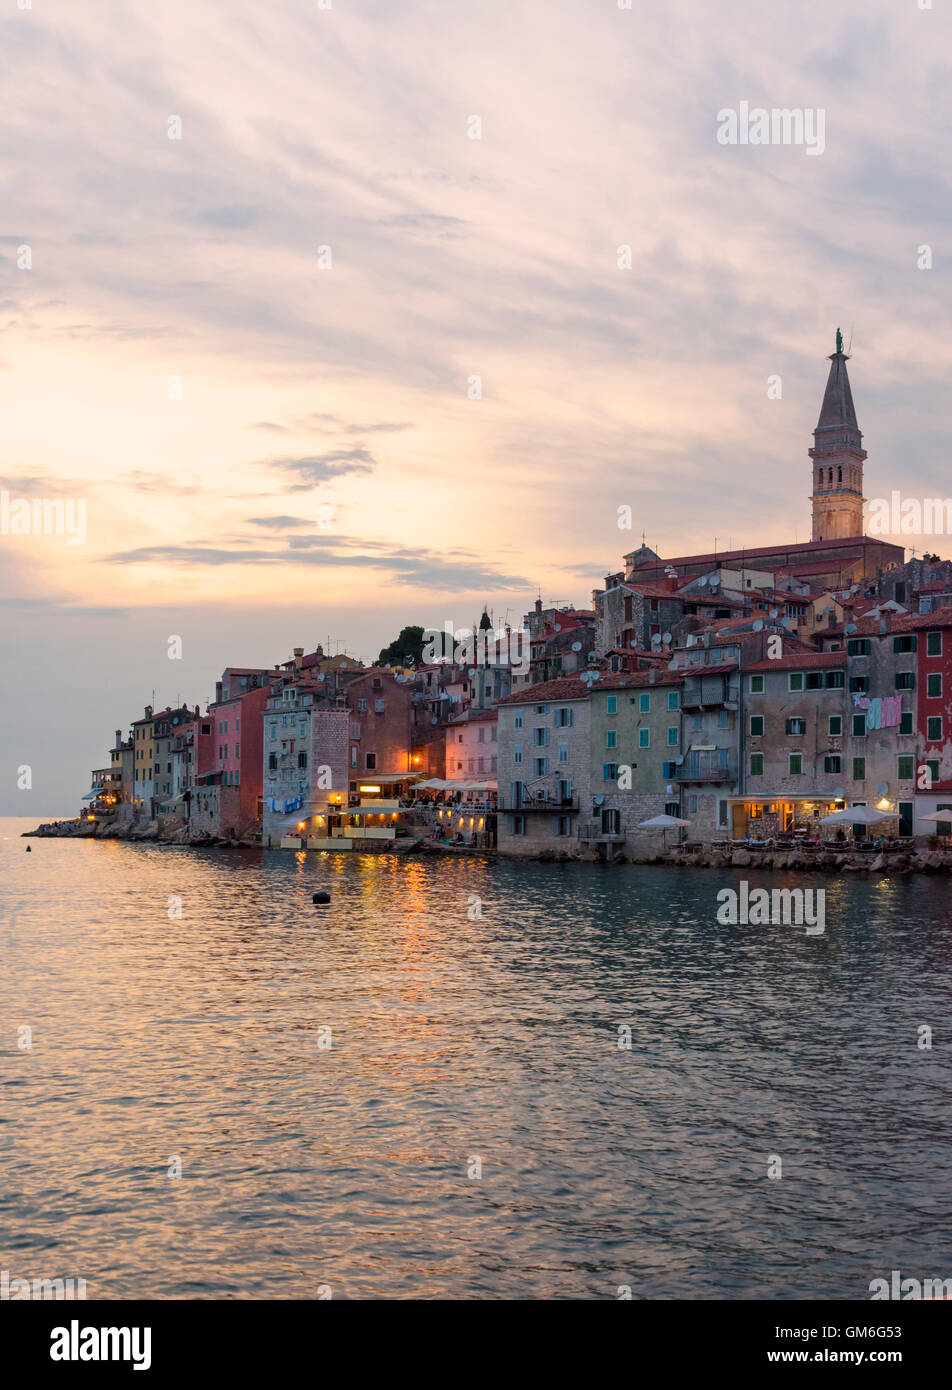 Sunset over the colourful weathered buildings of the old town peninsular of Rovinj, Istria, Croatia Stock Photo